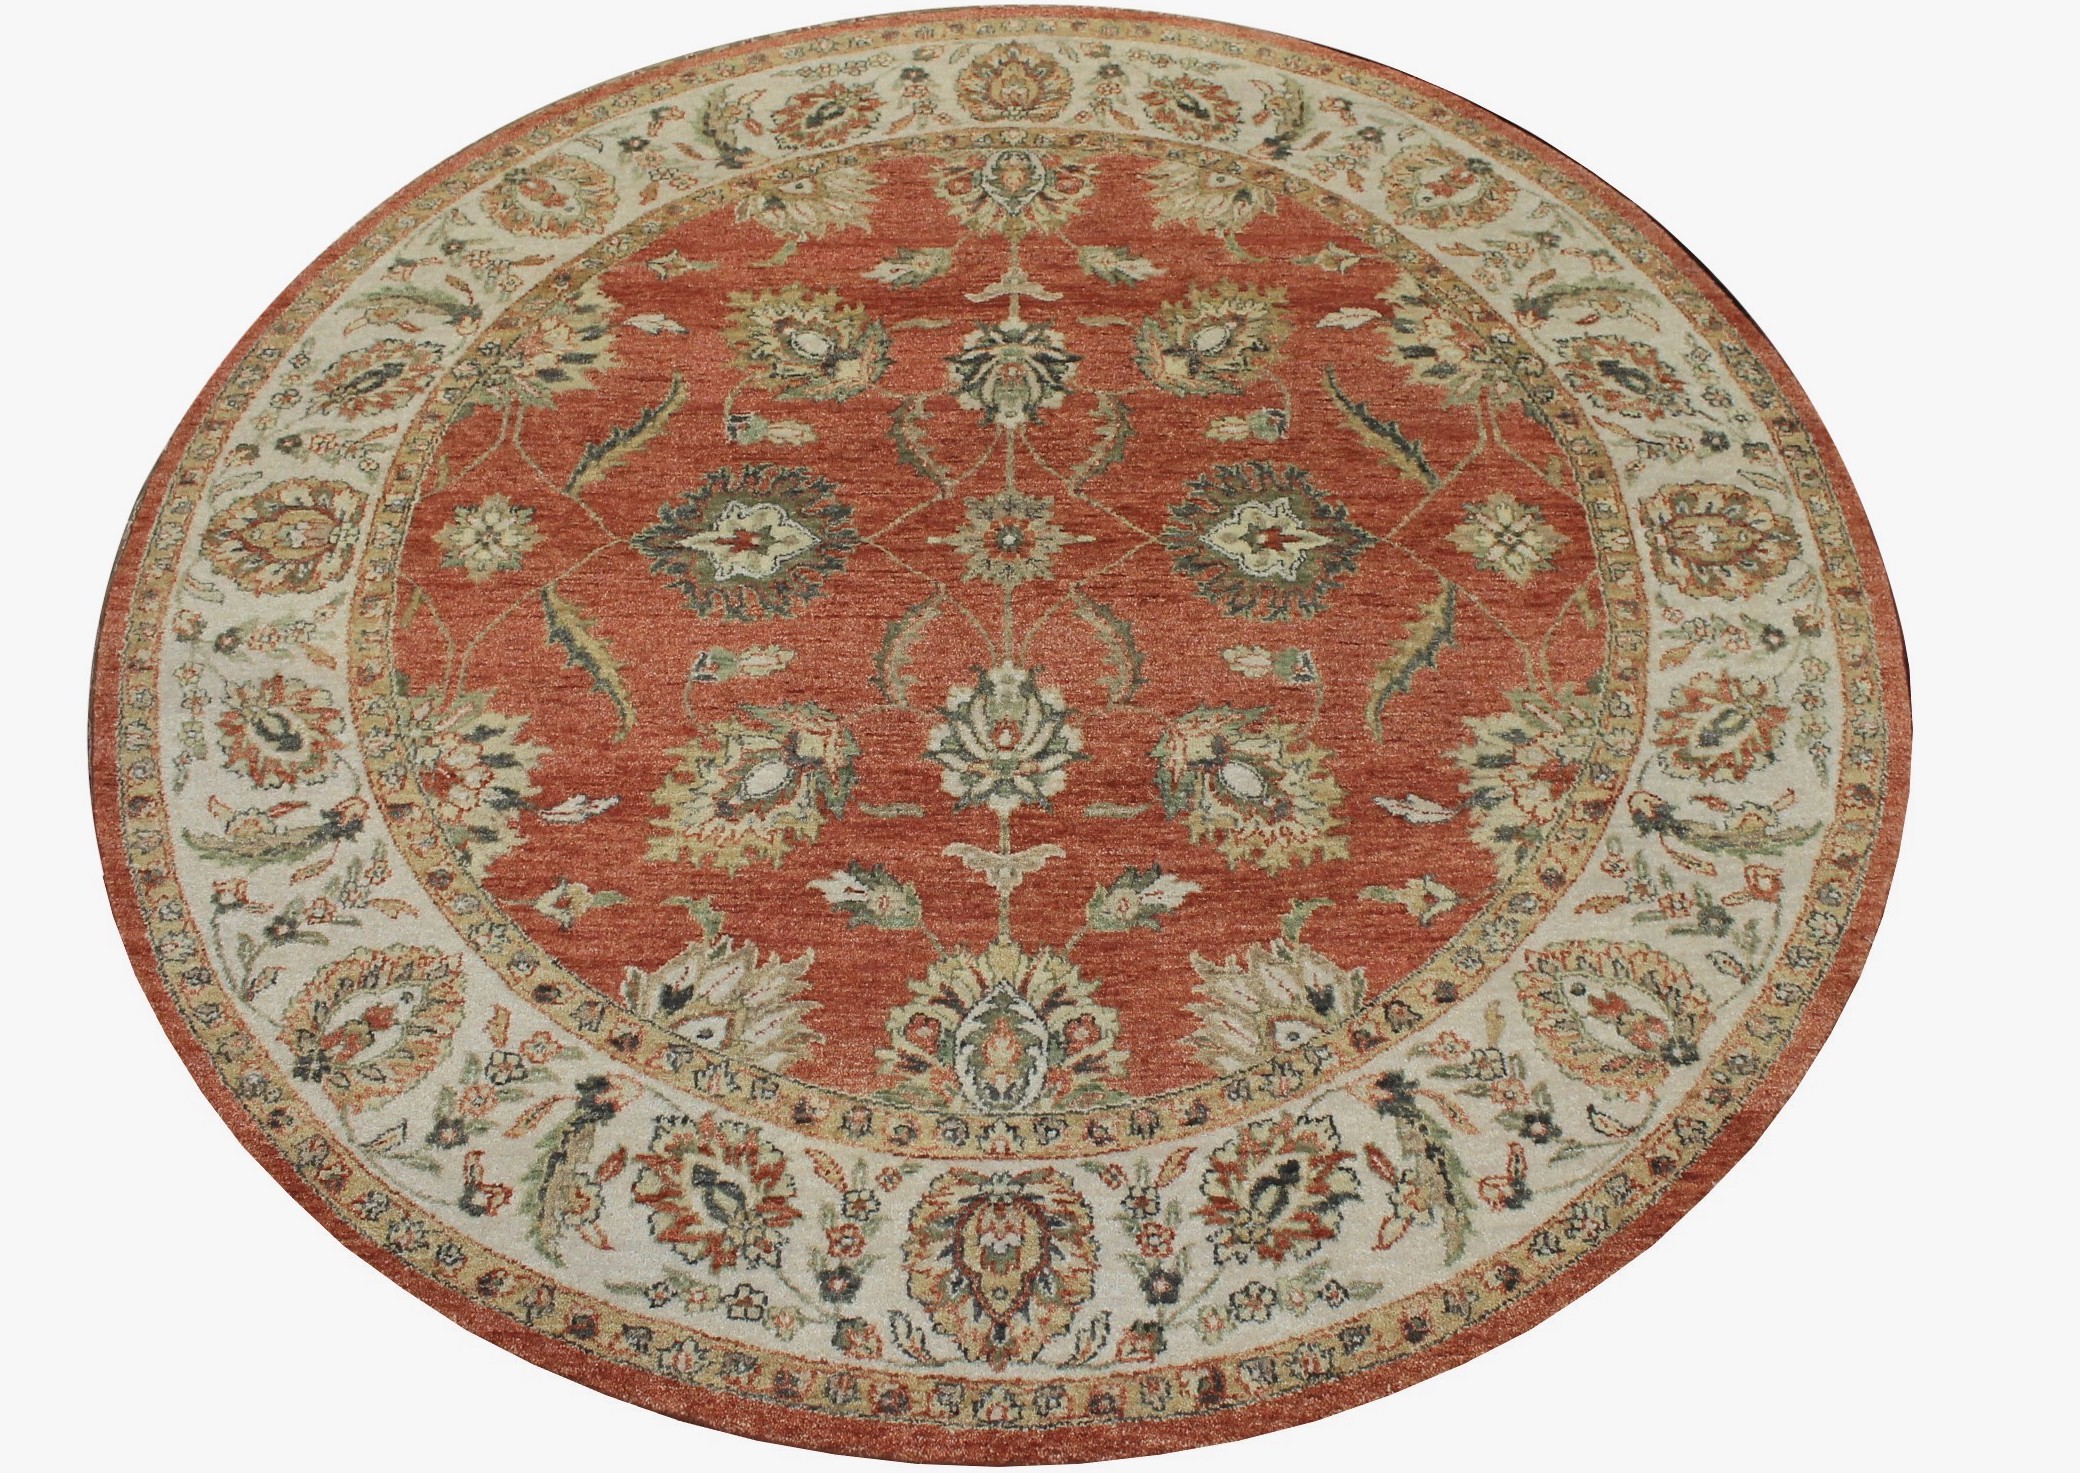 Clearance & Discount Rugs Hand Knotted Wool Round Rug 8232 Rust - Orange & Ivory - Beige Hand Knotted Rug